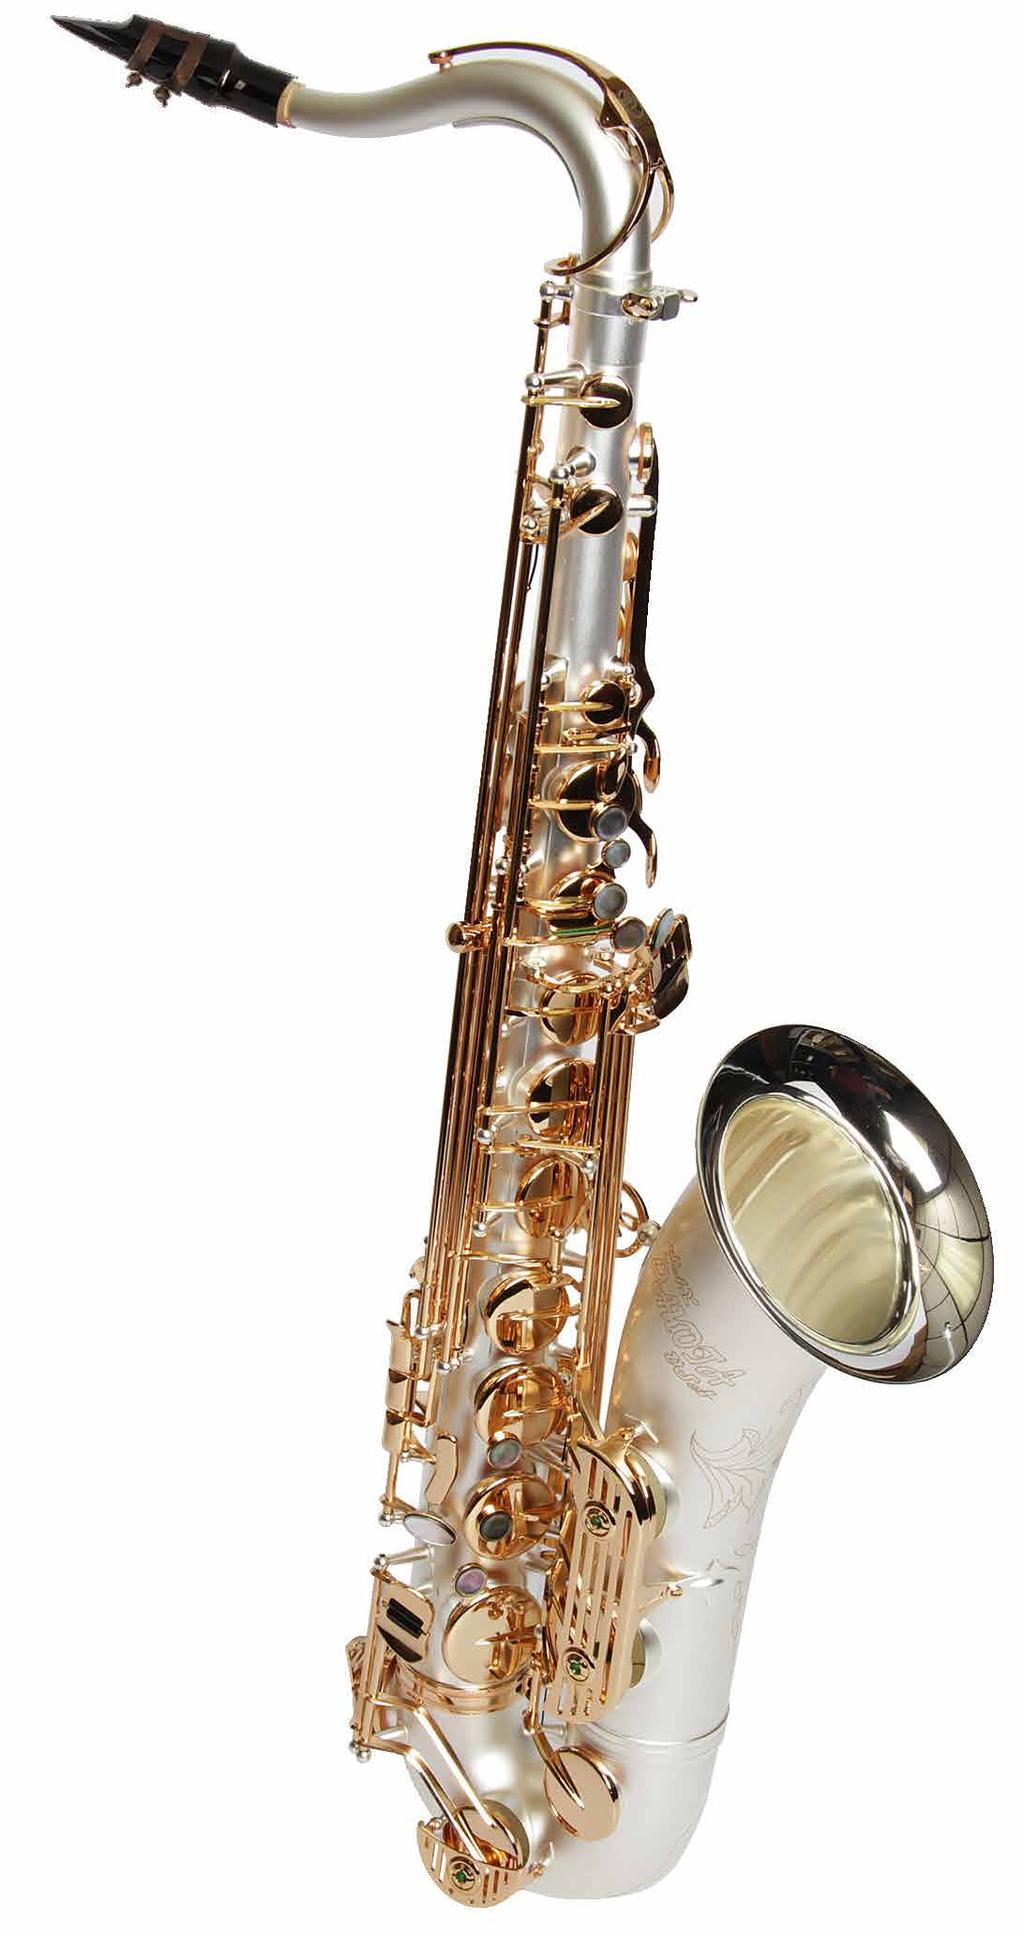 Tenor Saxophones XL SERIES Innovation, Excellence, Design & Performance... make this new generation of saxophones the best and only choice for professional artists.